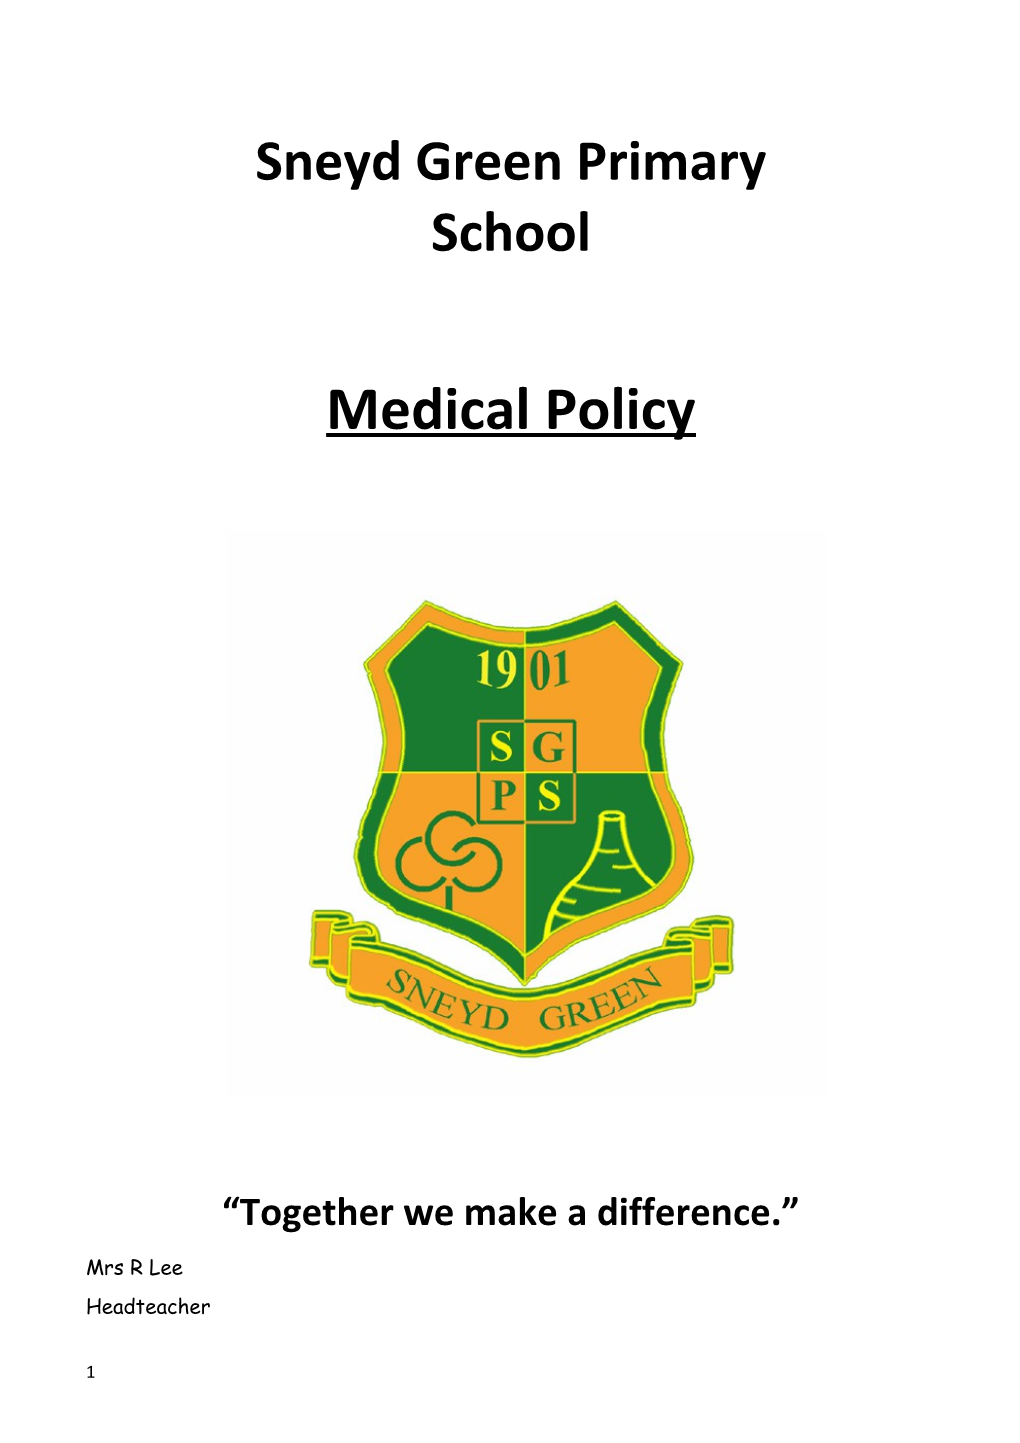 Sneyd Green Primary School Medical Policy